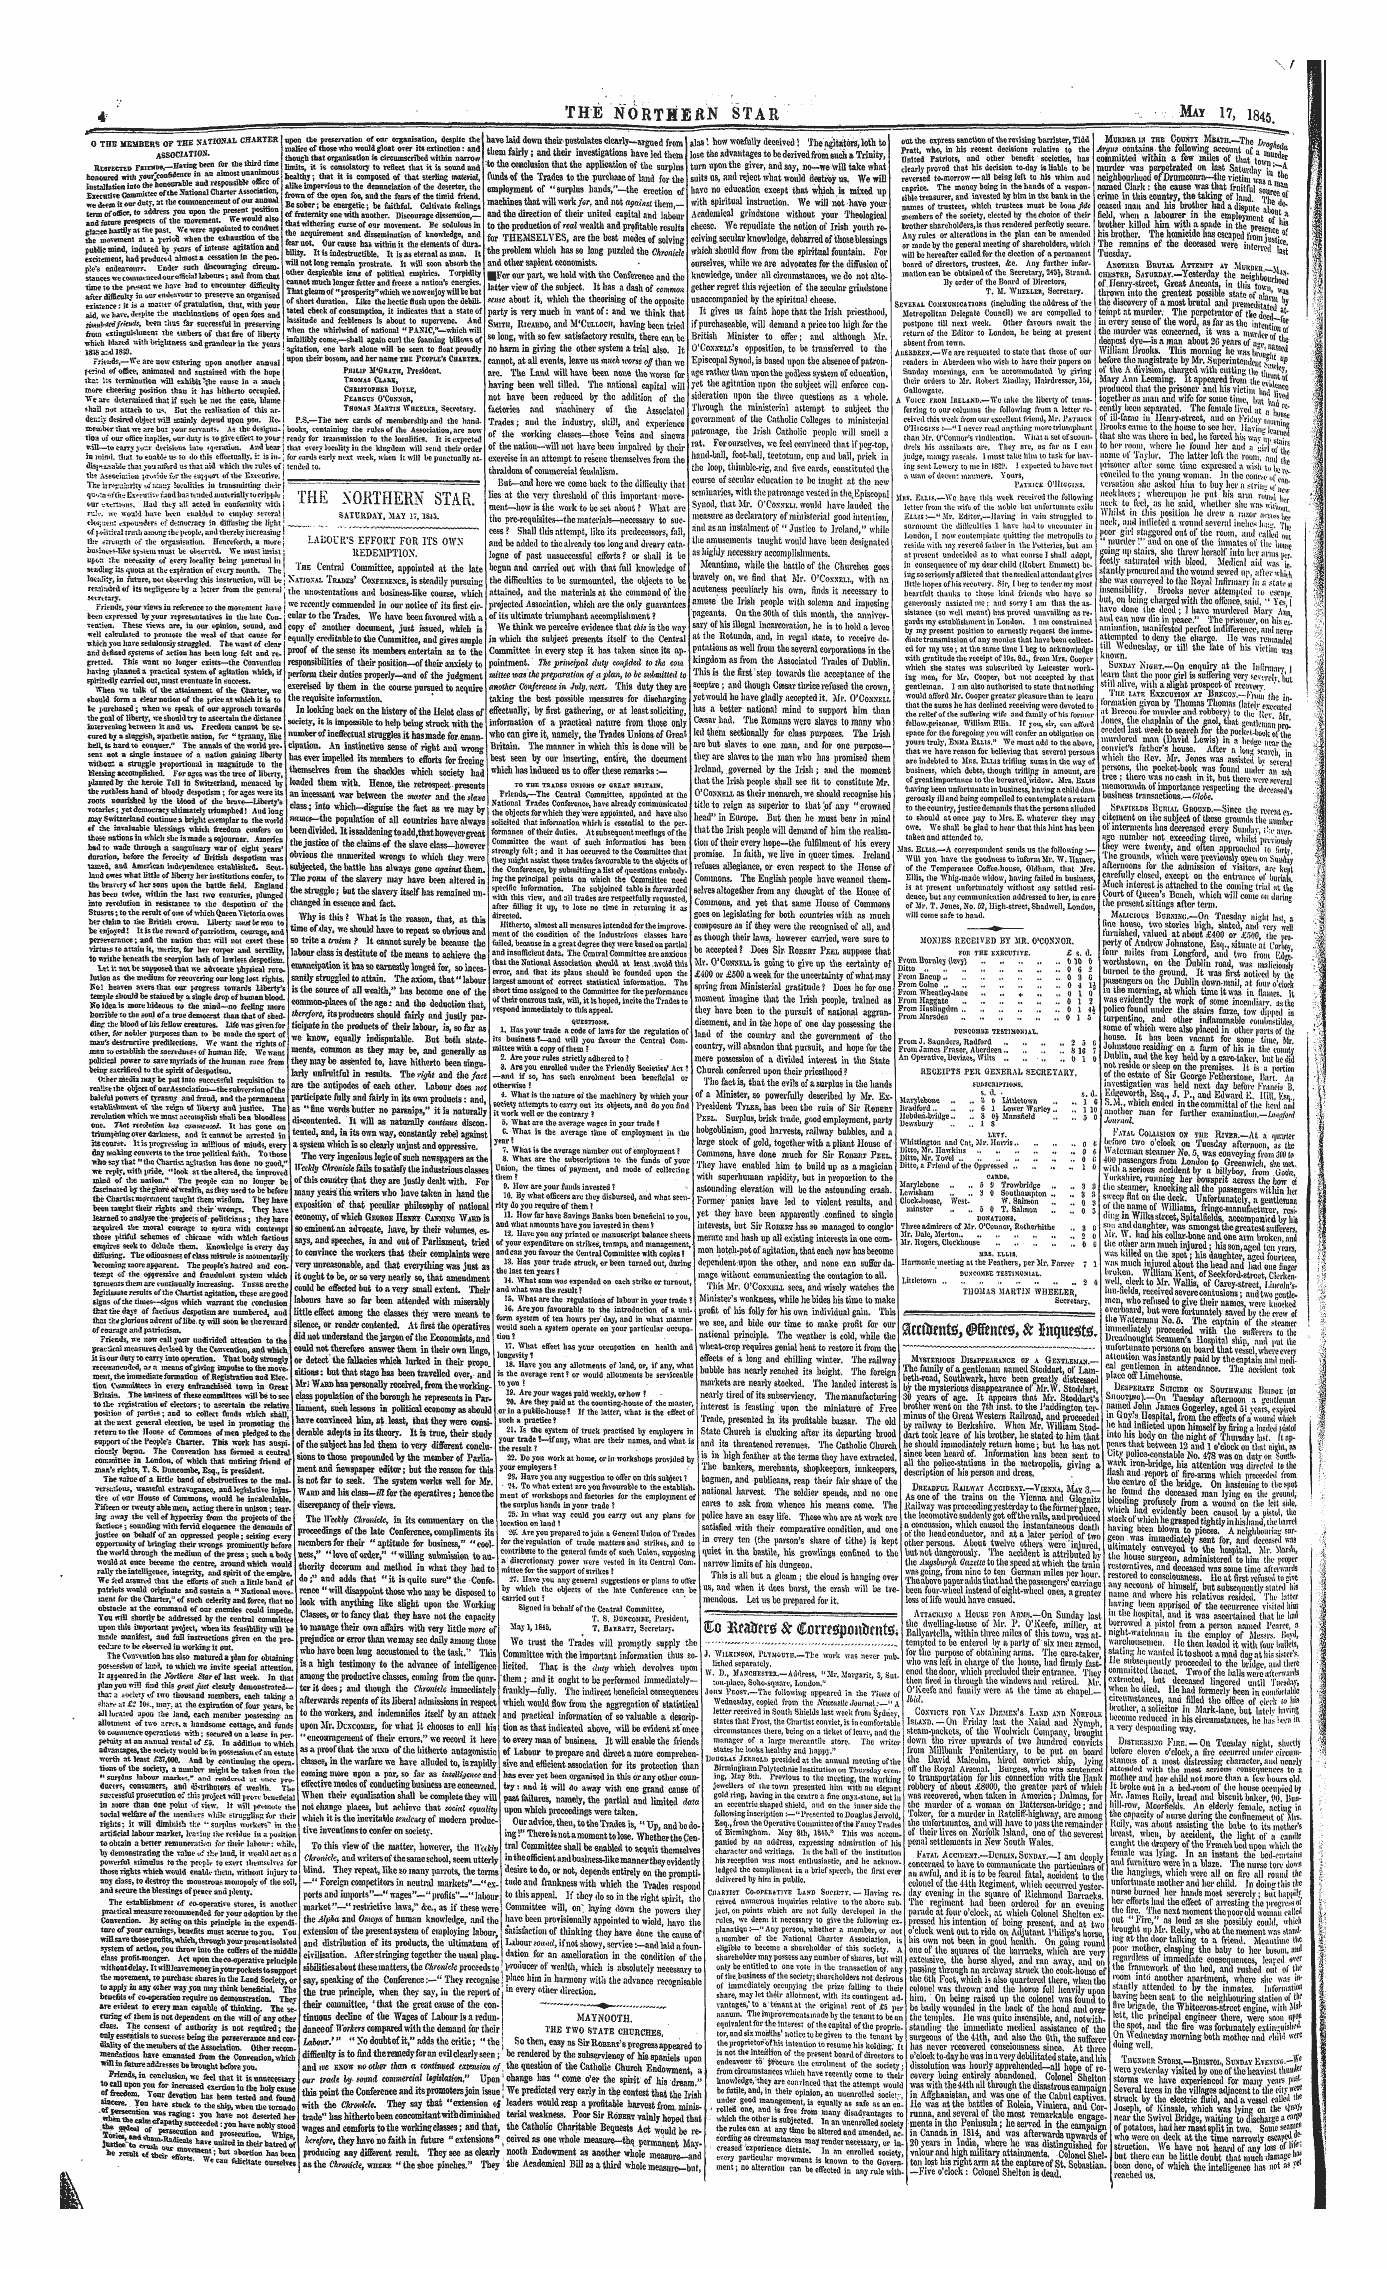 Northern Star (1837-1852): jS F Y, 1st edition - The Southern Star. Saturday, May 17, 1sj5.